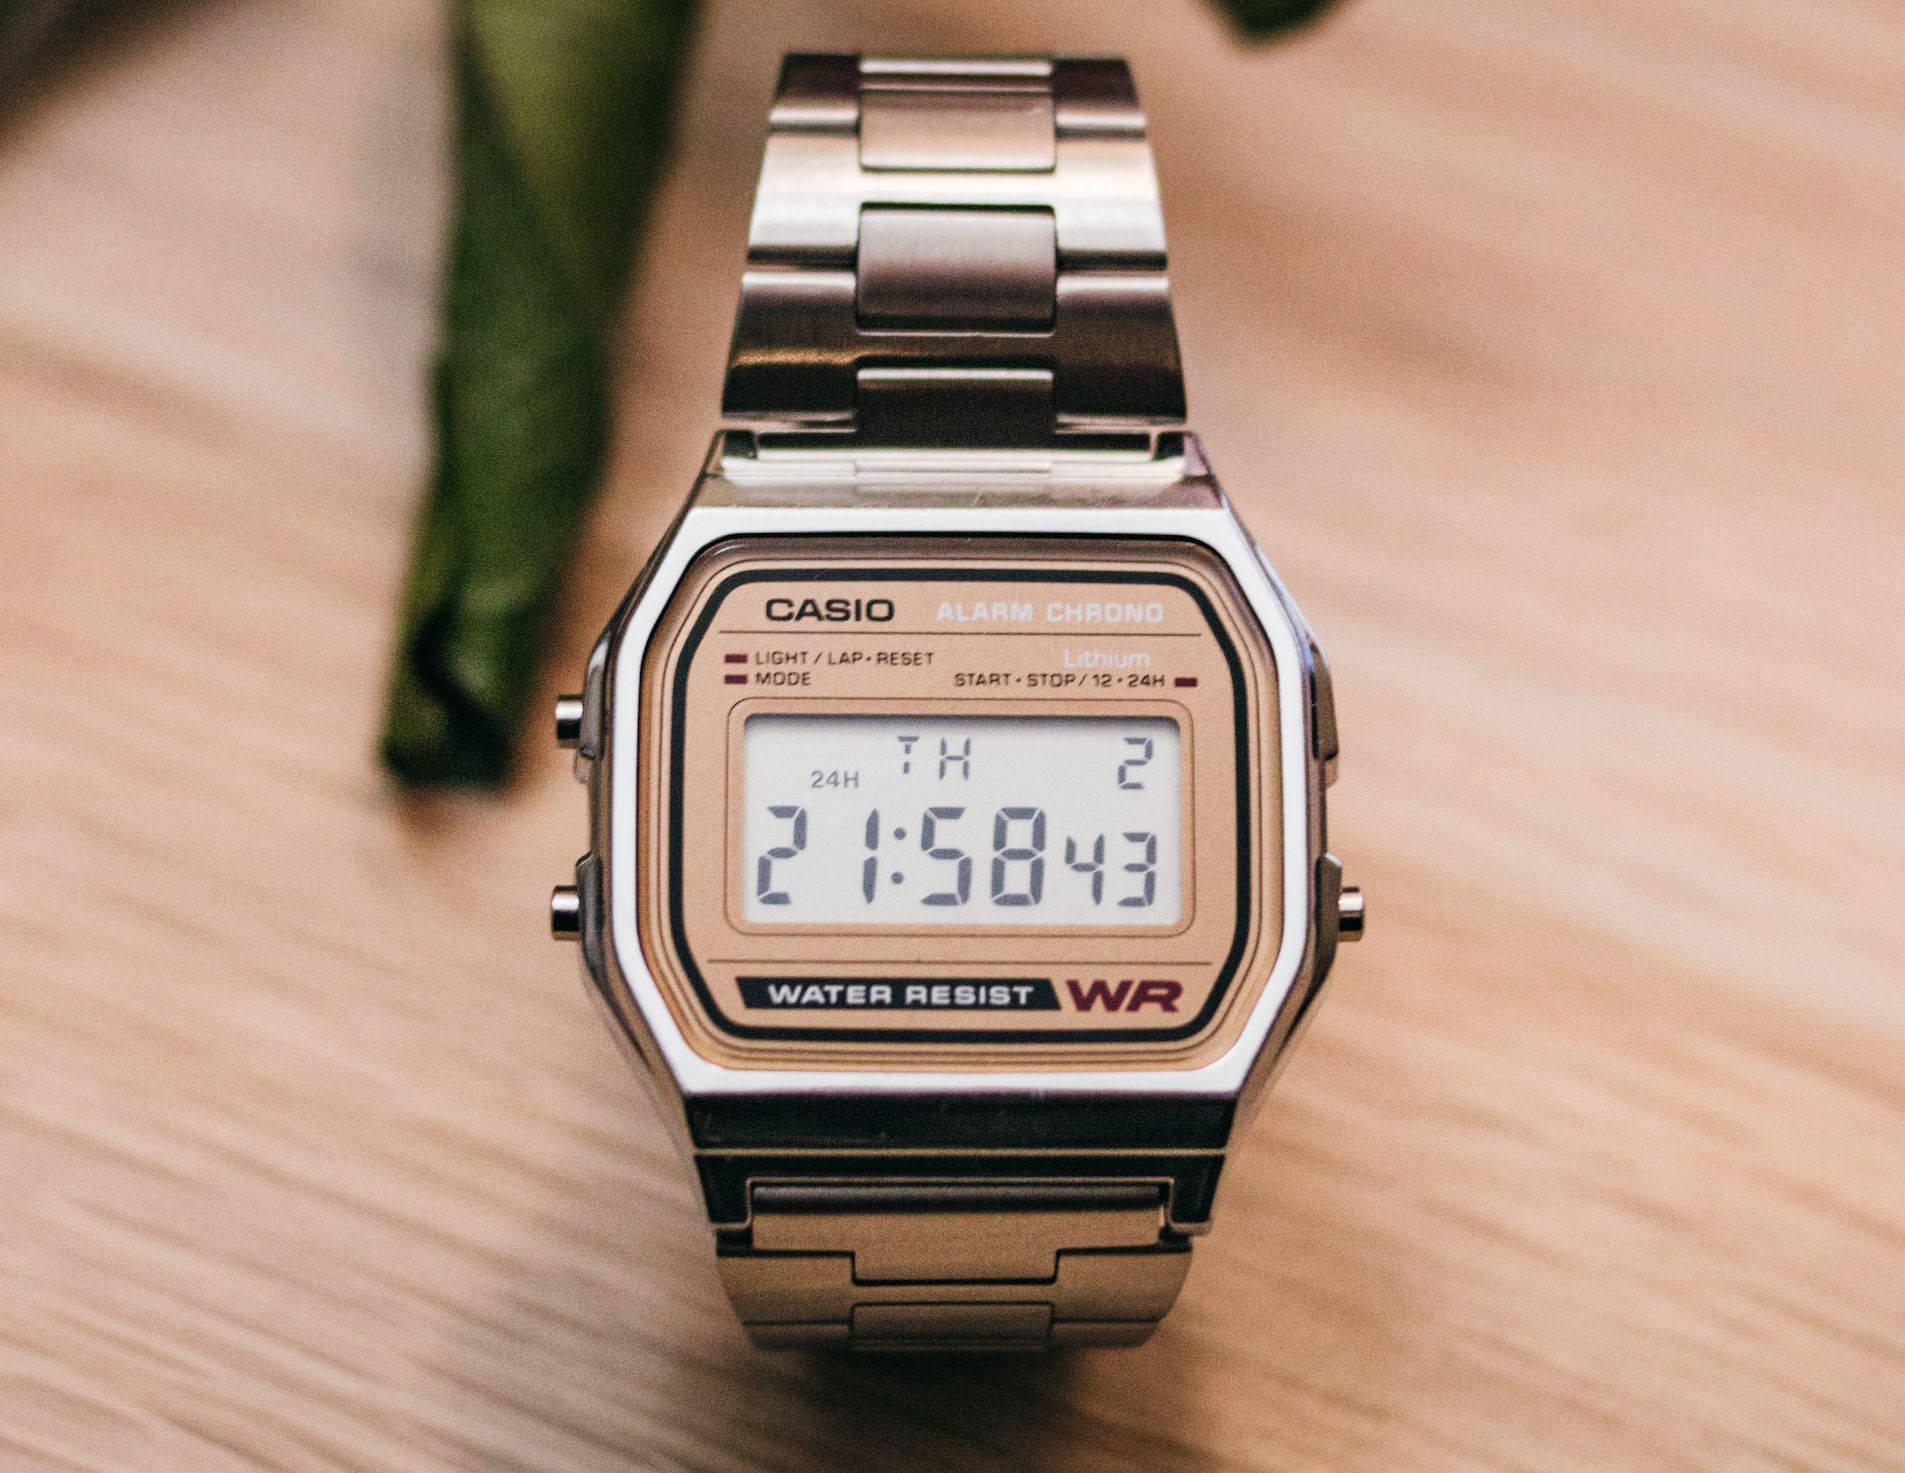 Cyberattack After in Consumers Casio Apologizes to Data Stolen